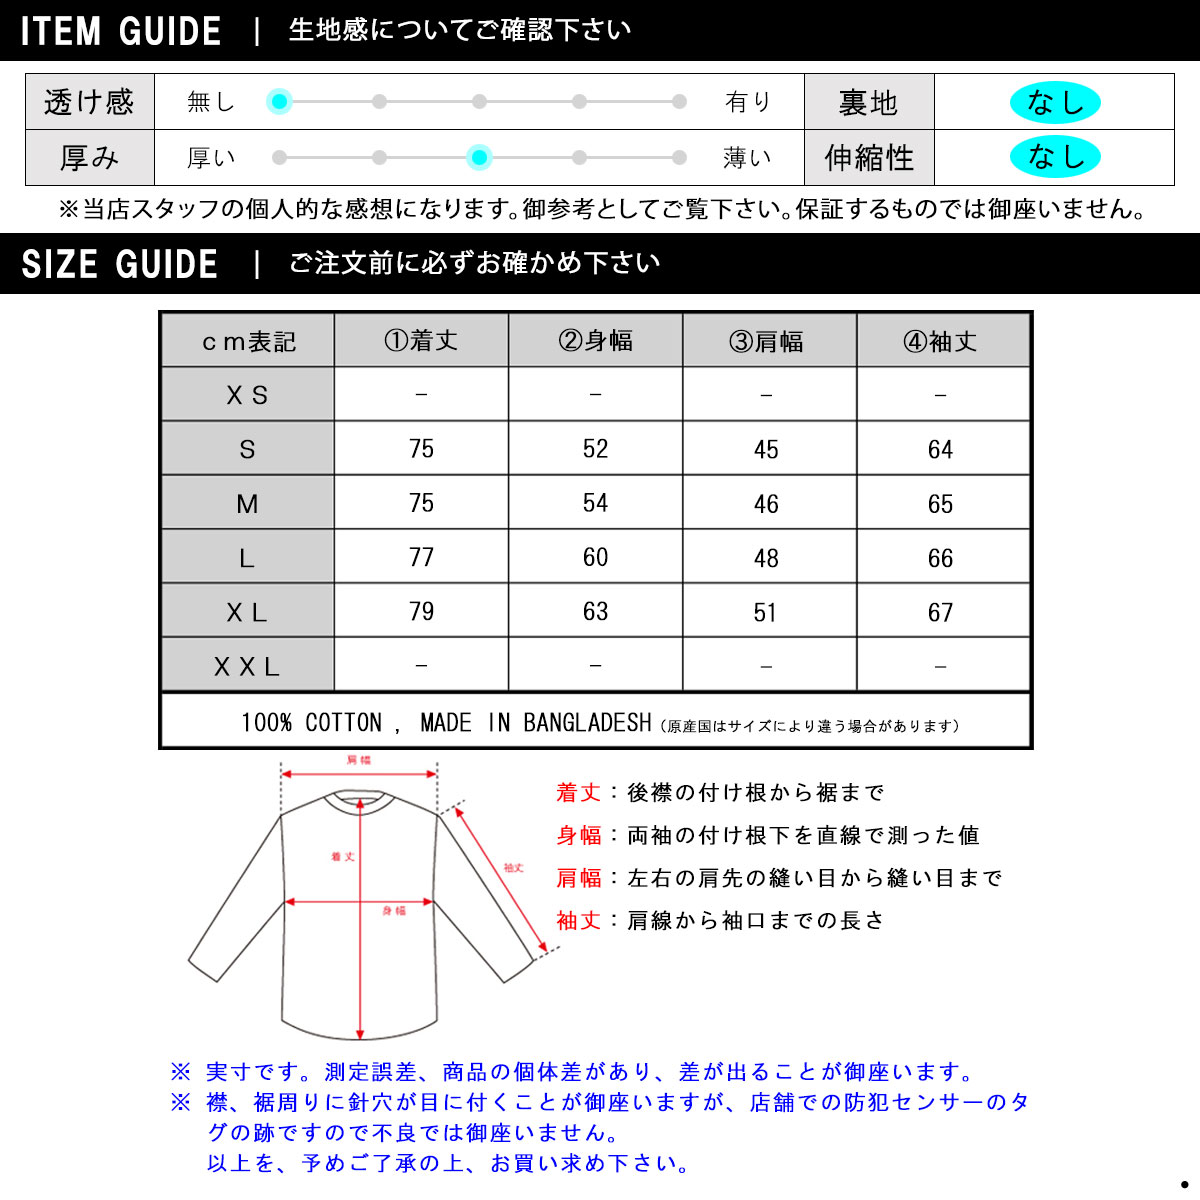 Jeans Size Chart American Eagle